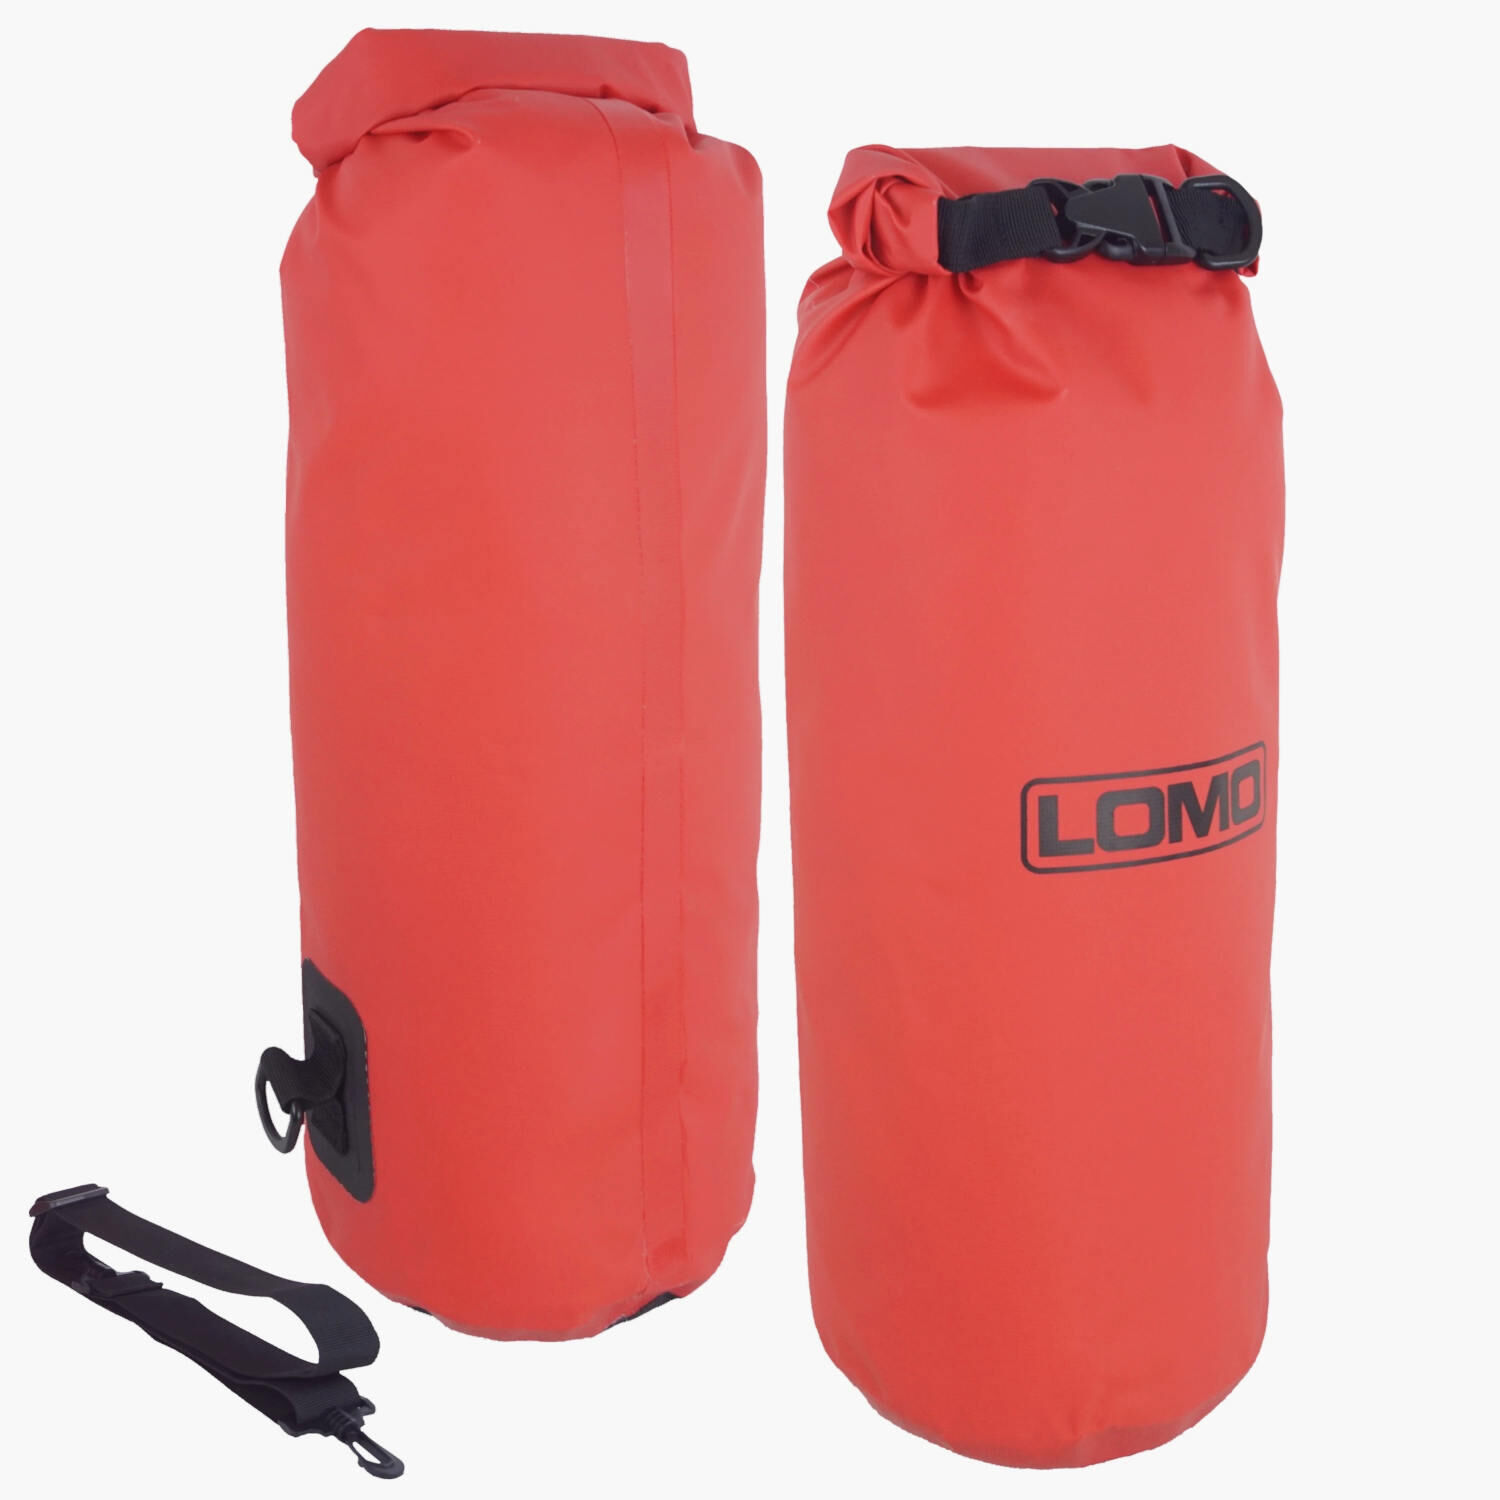 LOMO Lomo 12L Drybags - Red heavy duty with shoulder strap